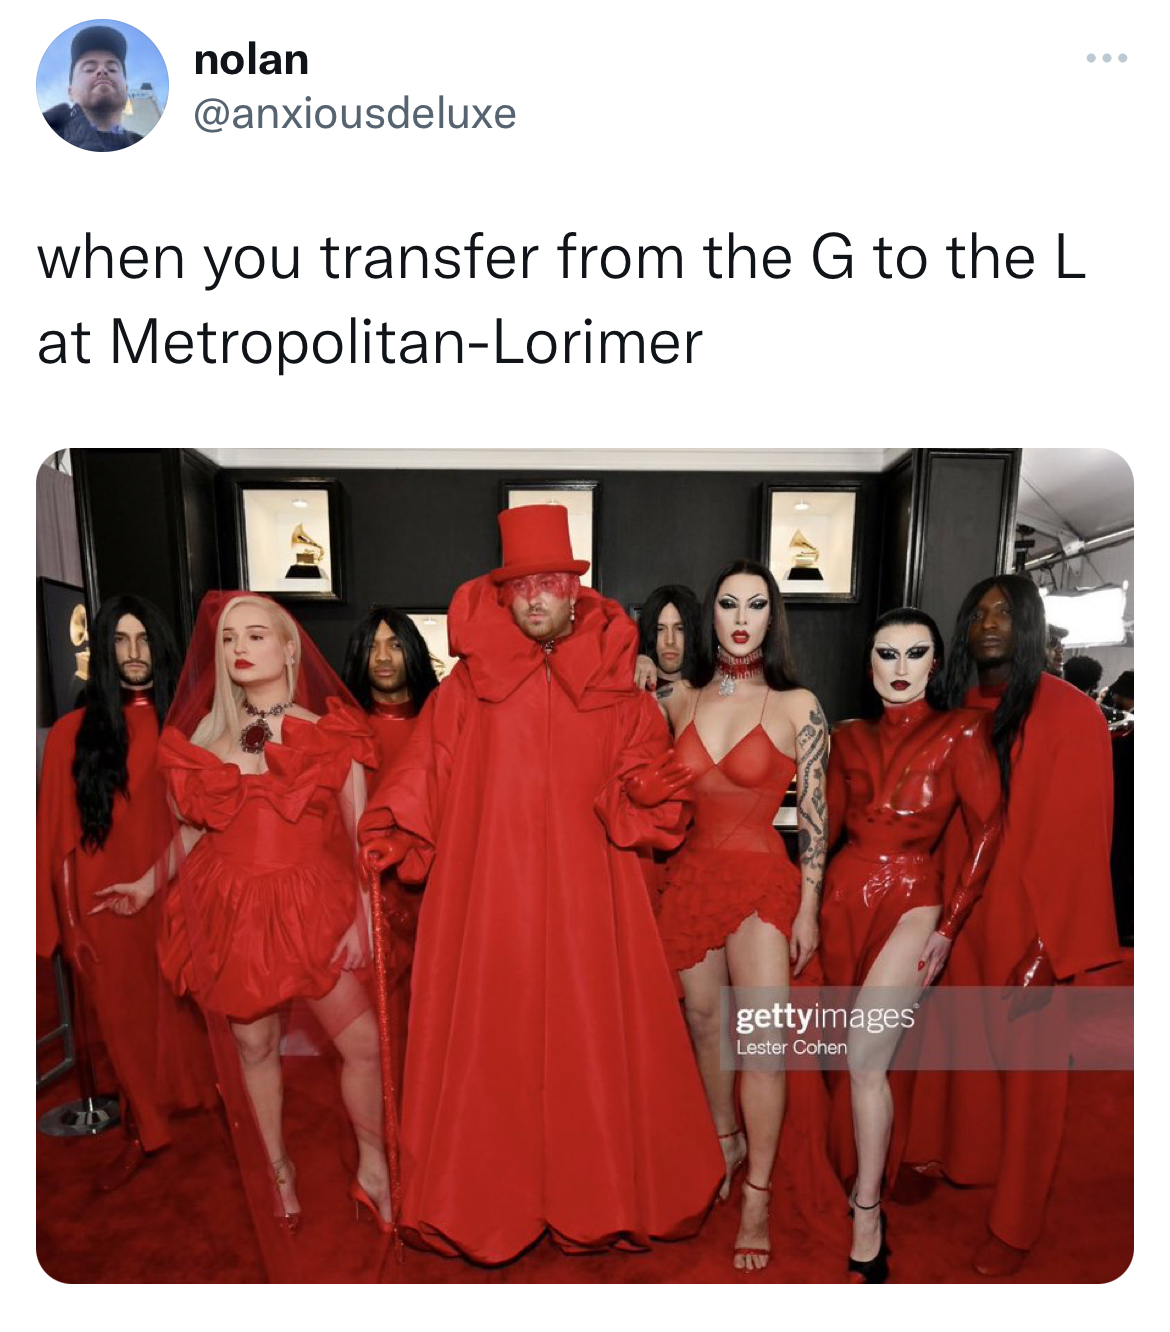 savage and absurd tweets - 65th Annual Grammy Awards - nolan when you transfer from the G to the L at MetropolitanLorimer 1 gettyimages Lester Cohen 19